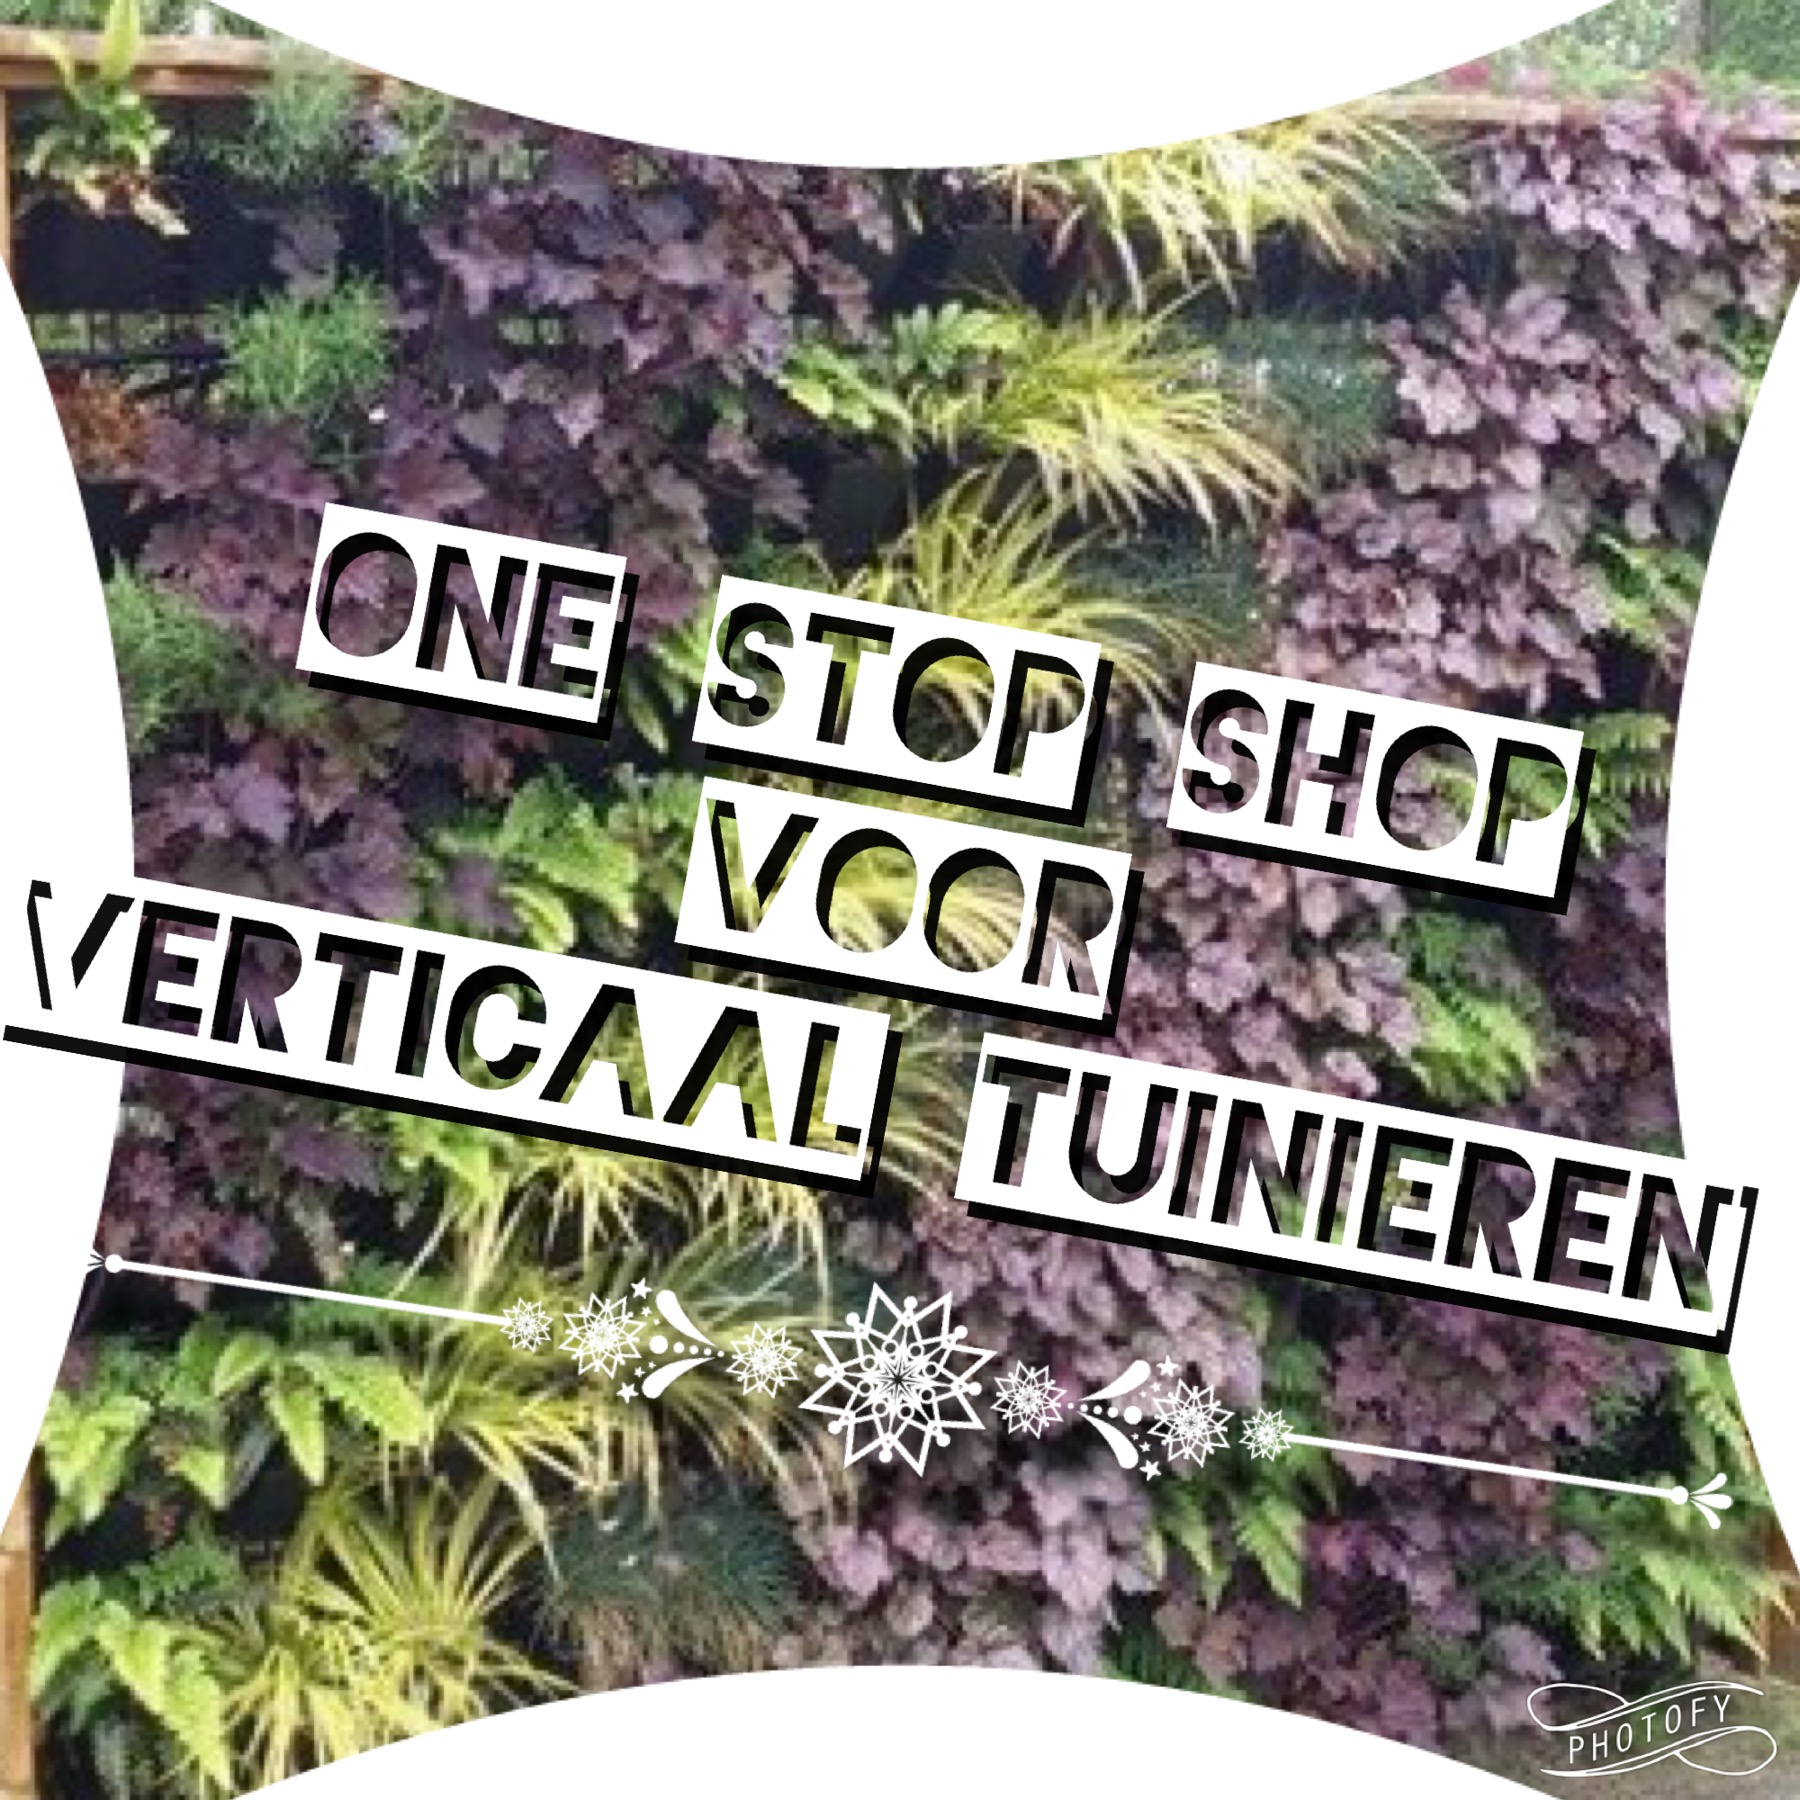 Verticale tuin one stop shop